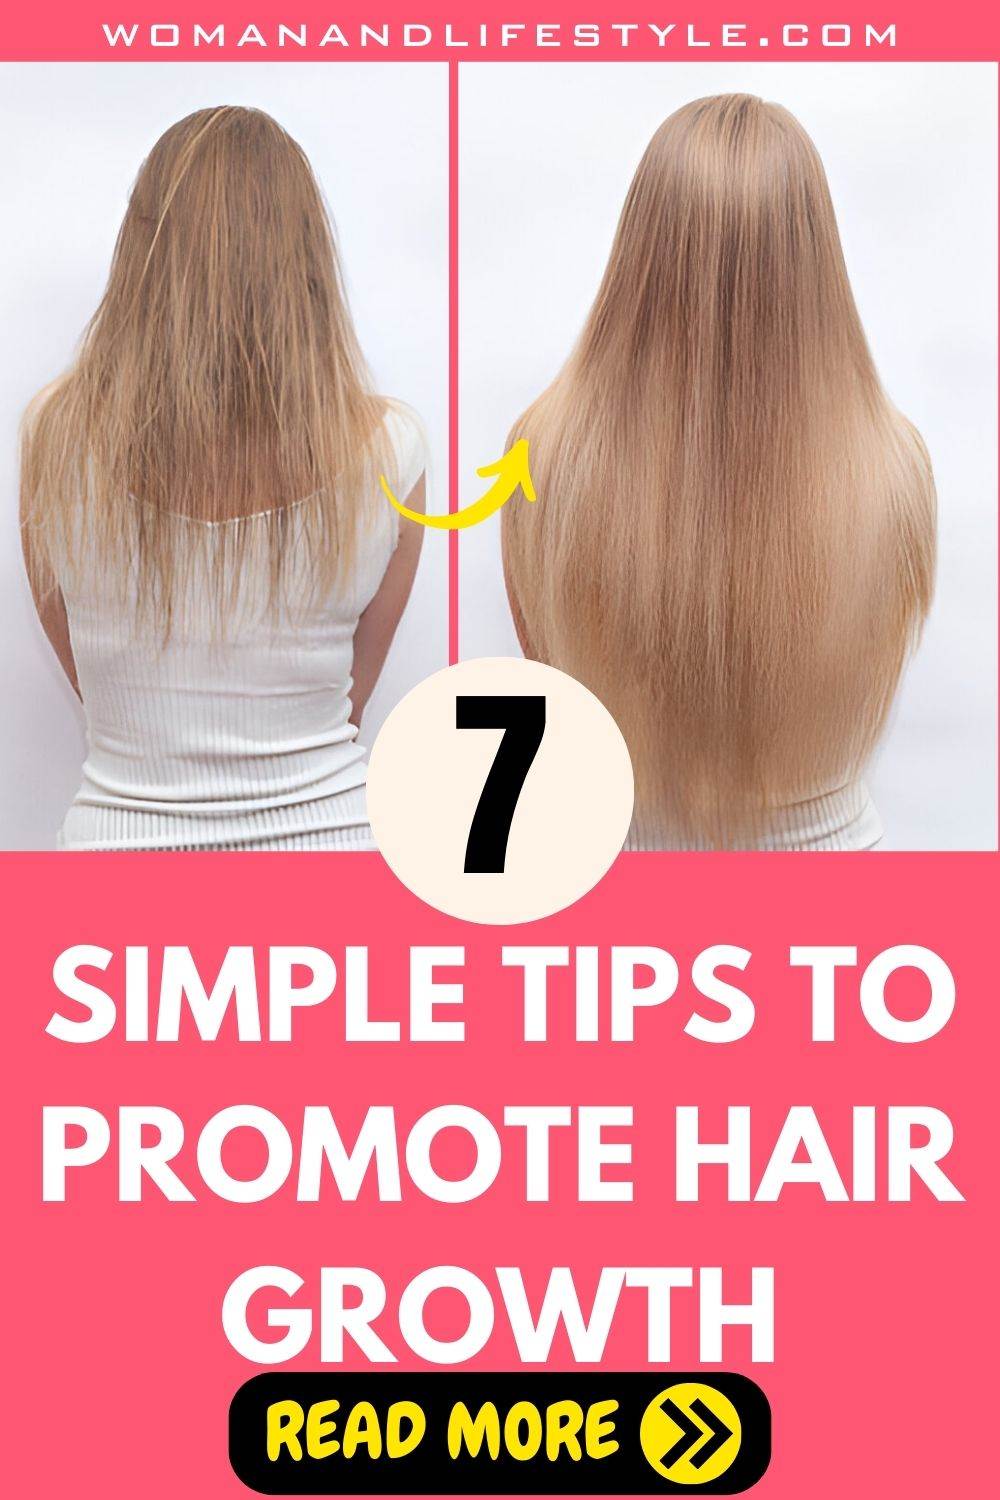 7 Simple Tips To Promote Hair Growth And Make Your Hair Stronger - 32